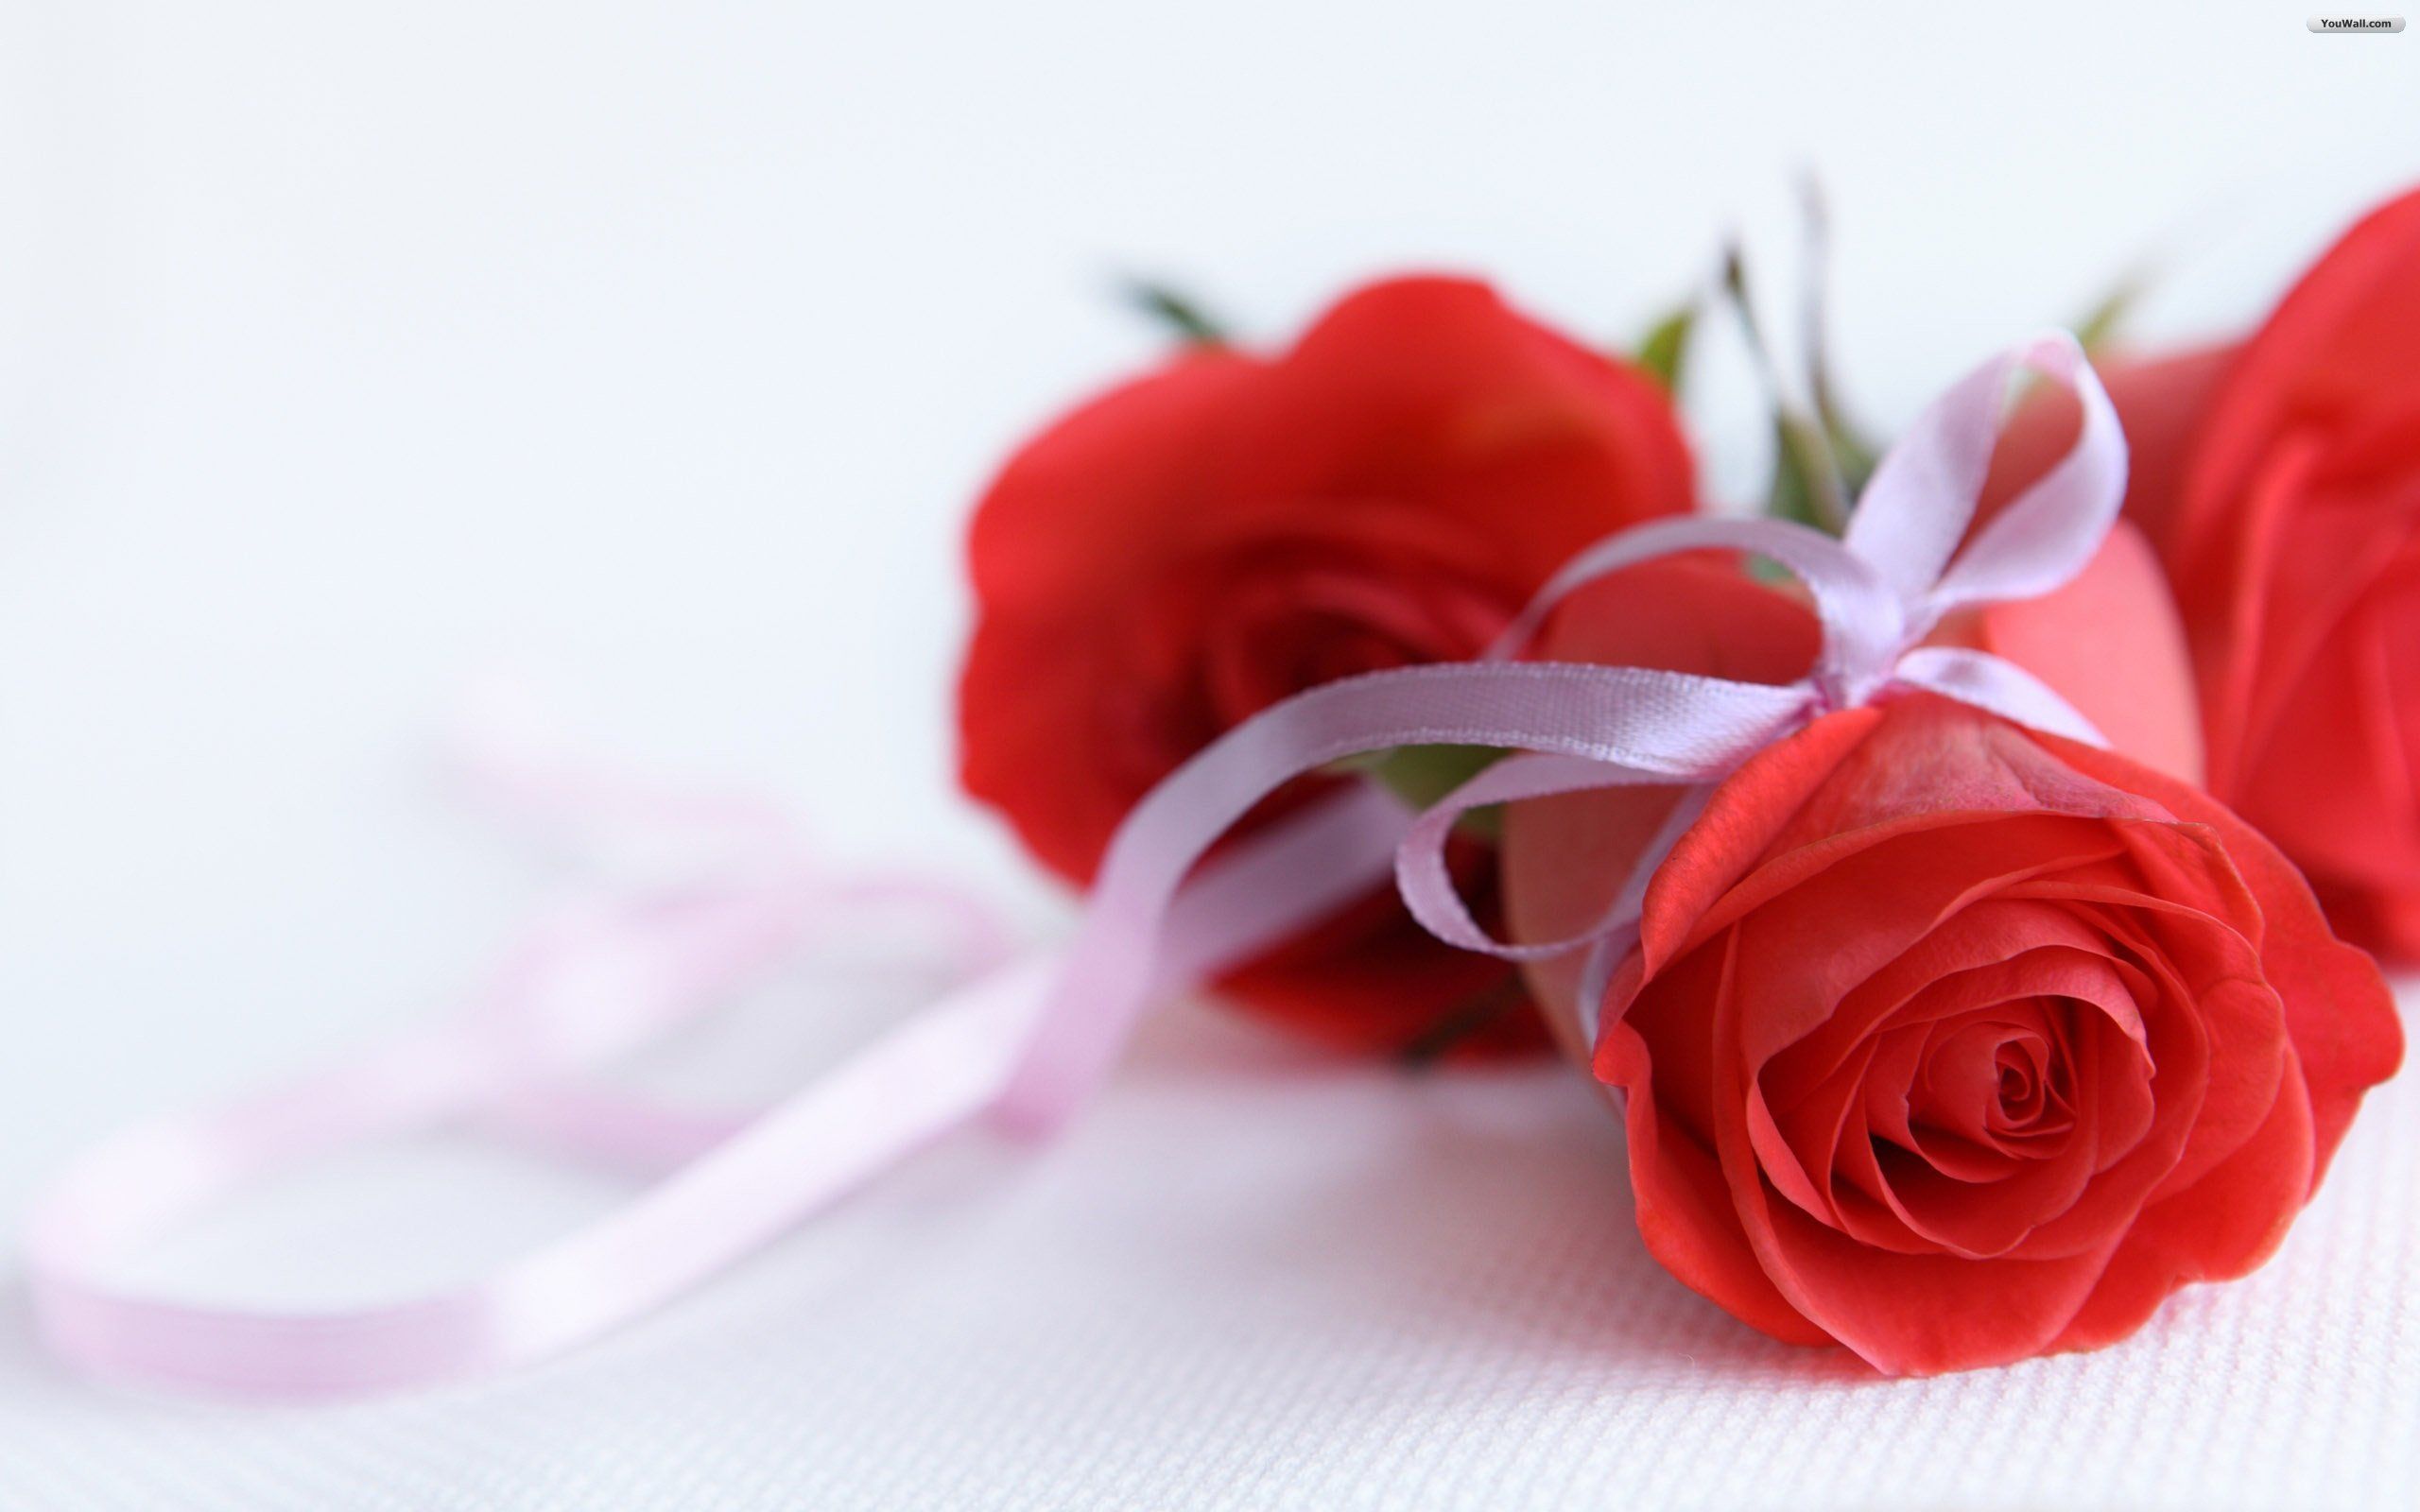 Flower images hd rose and wallpapers Download